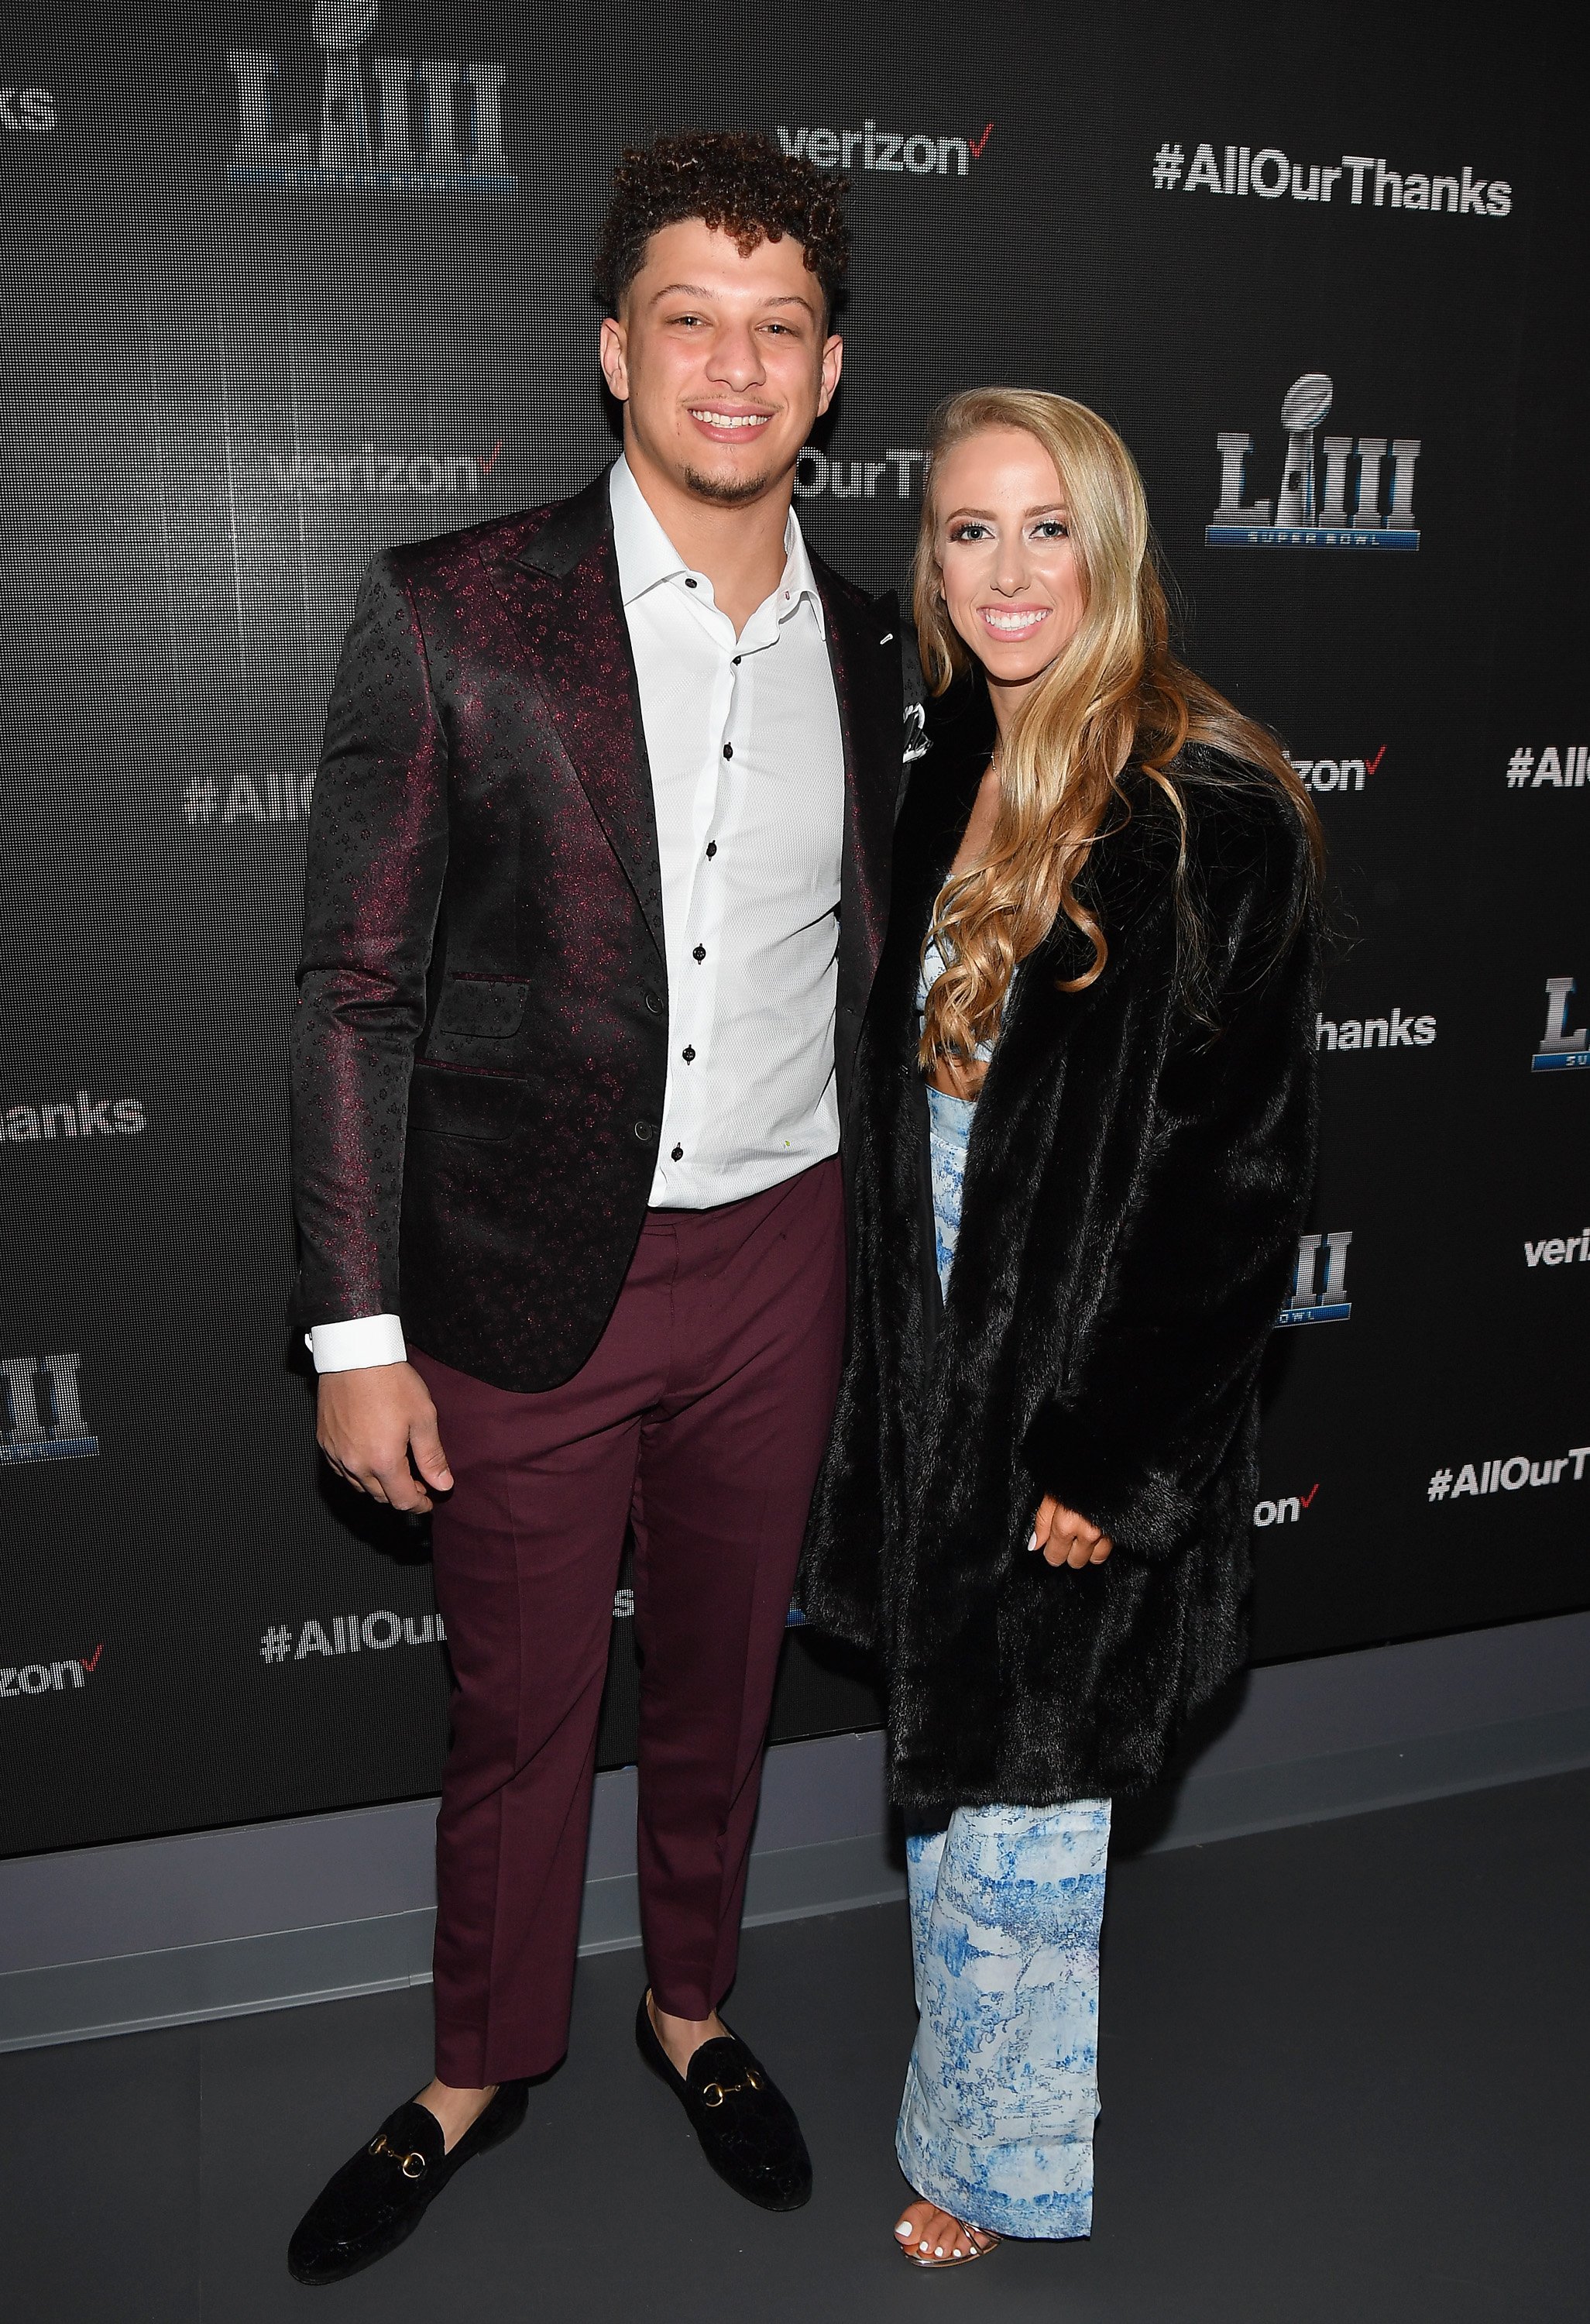 Patrick Mahomes II and Brittany Matthews attend the world premiere event for "The Team That Wouldn't Be Here" documentary on January 31, 2019 in Atlanta, Georgia | Photo: Getty Images